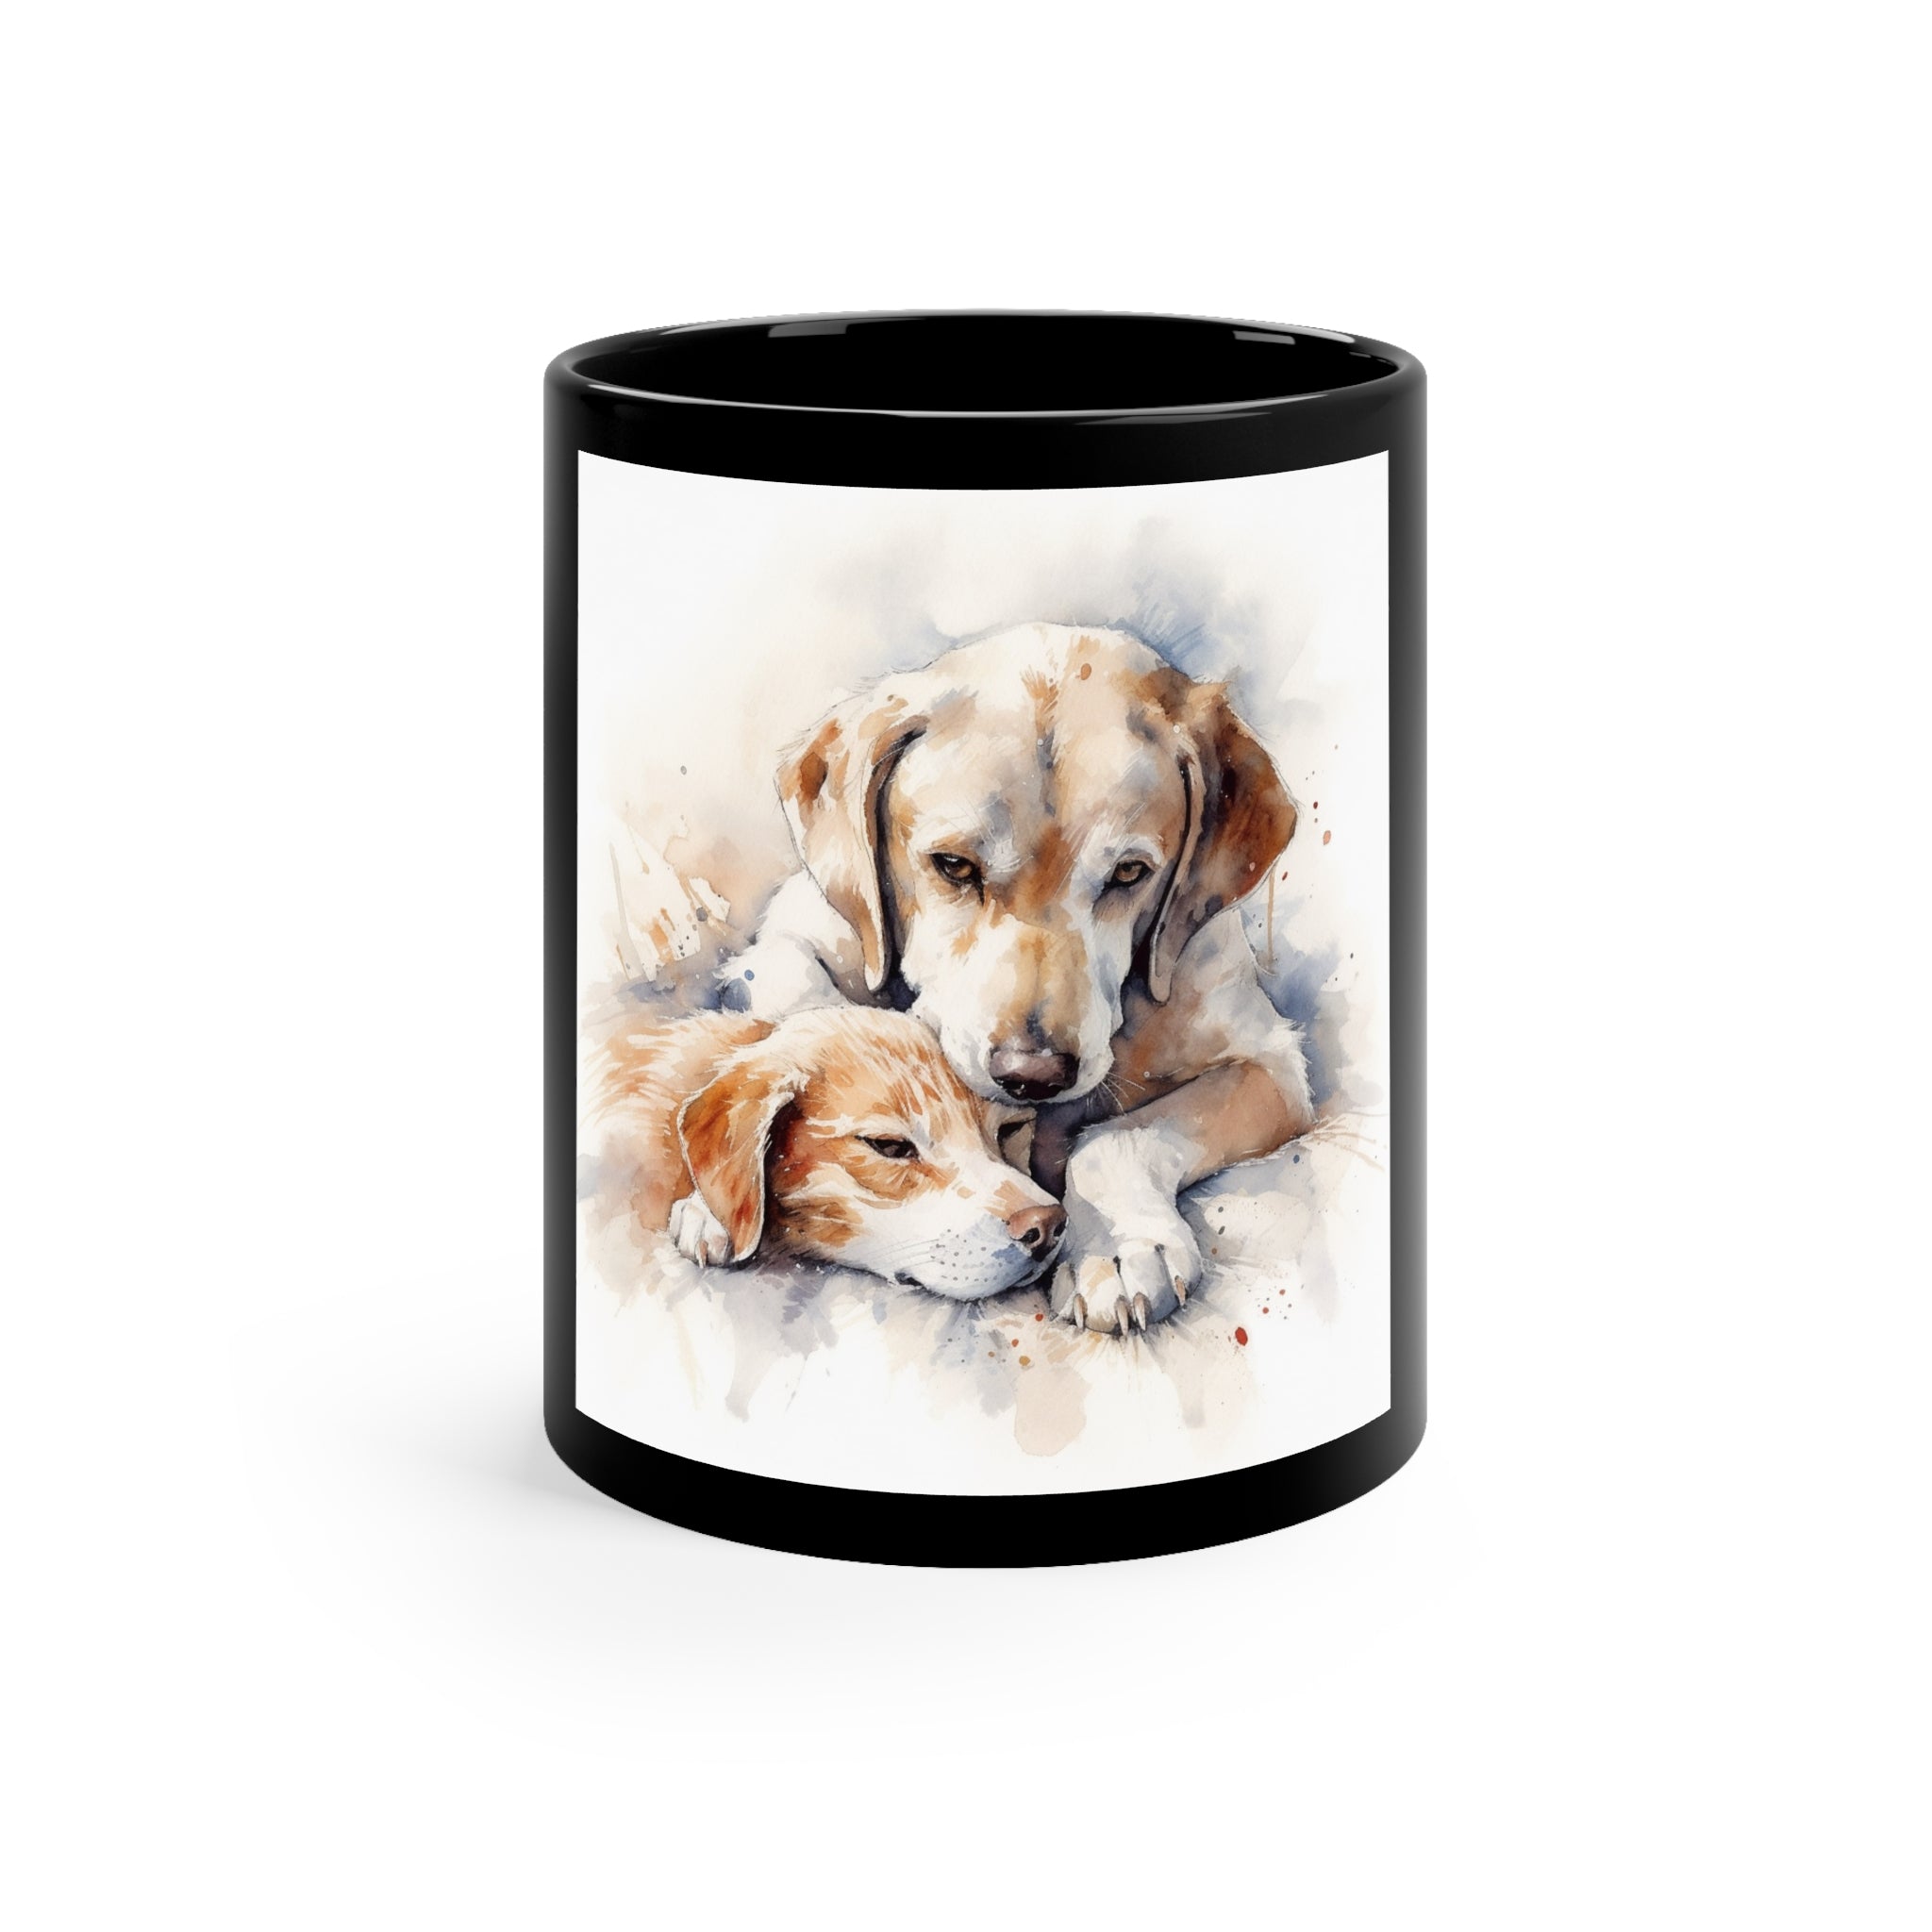 🐶🐱 Comfort Dog and Cat Pals 11oz Black Mug - Cozy Coffee Cup for Pet Lovers | Relaxing Mornings with Your Furry Friends